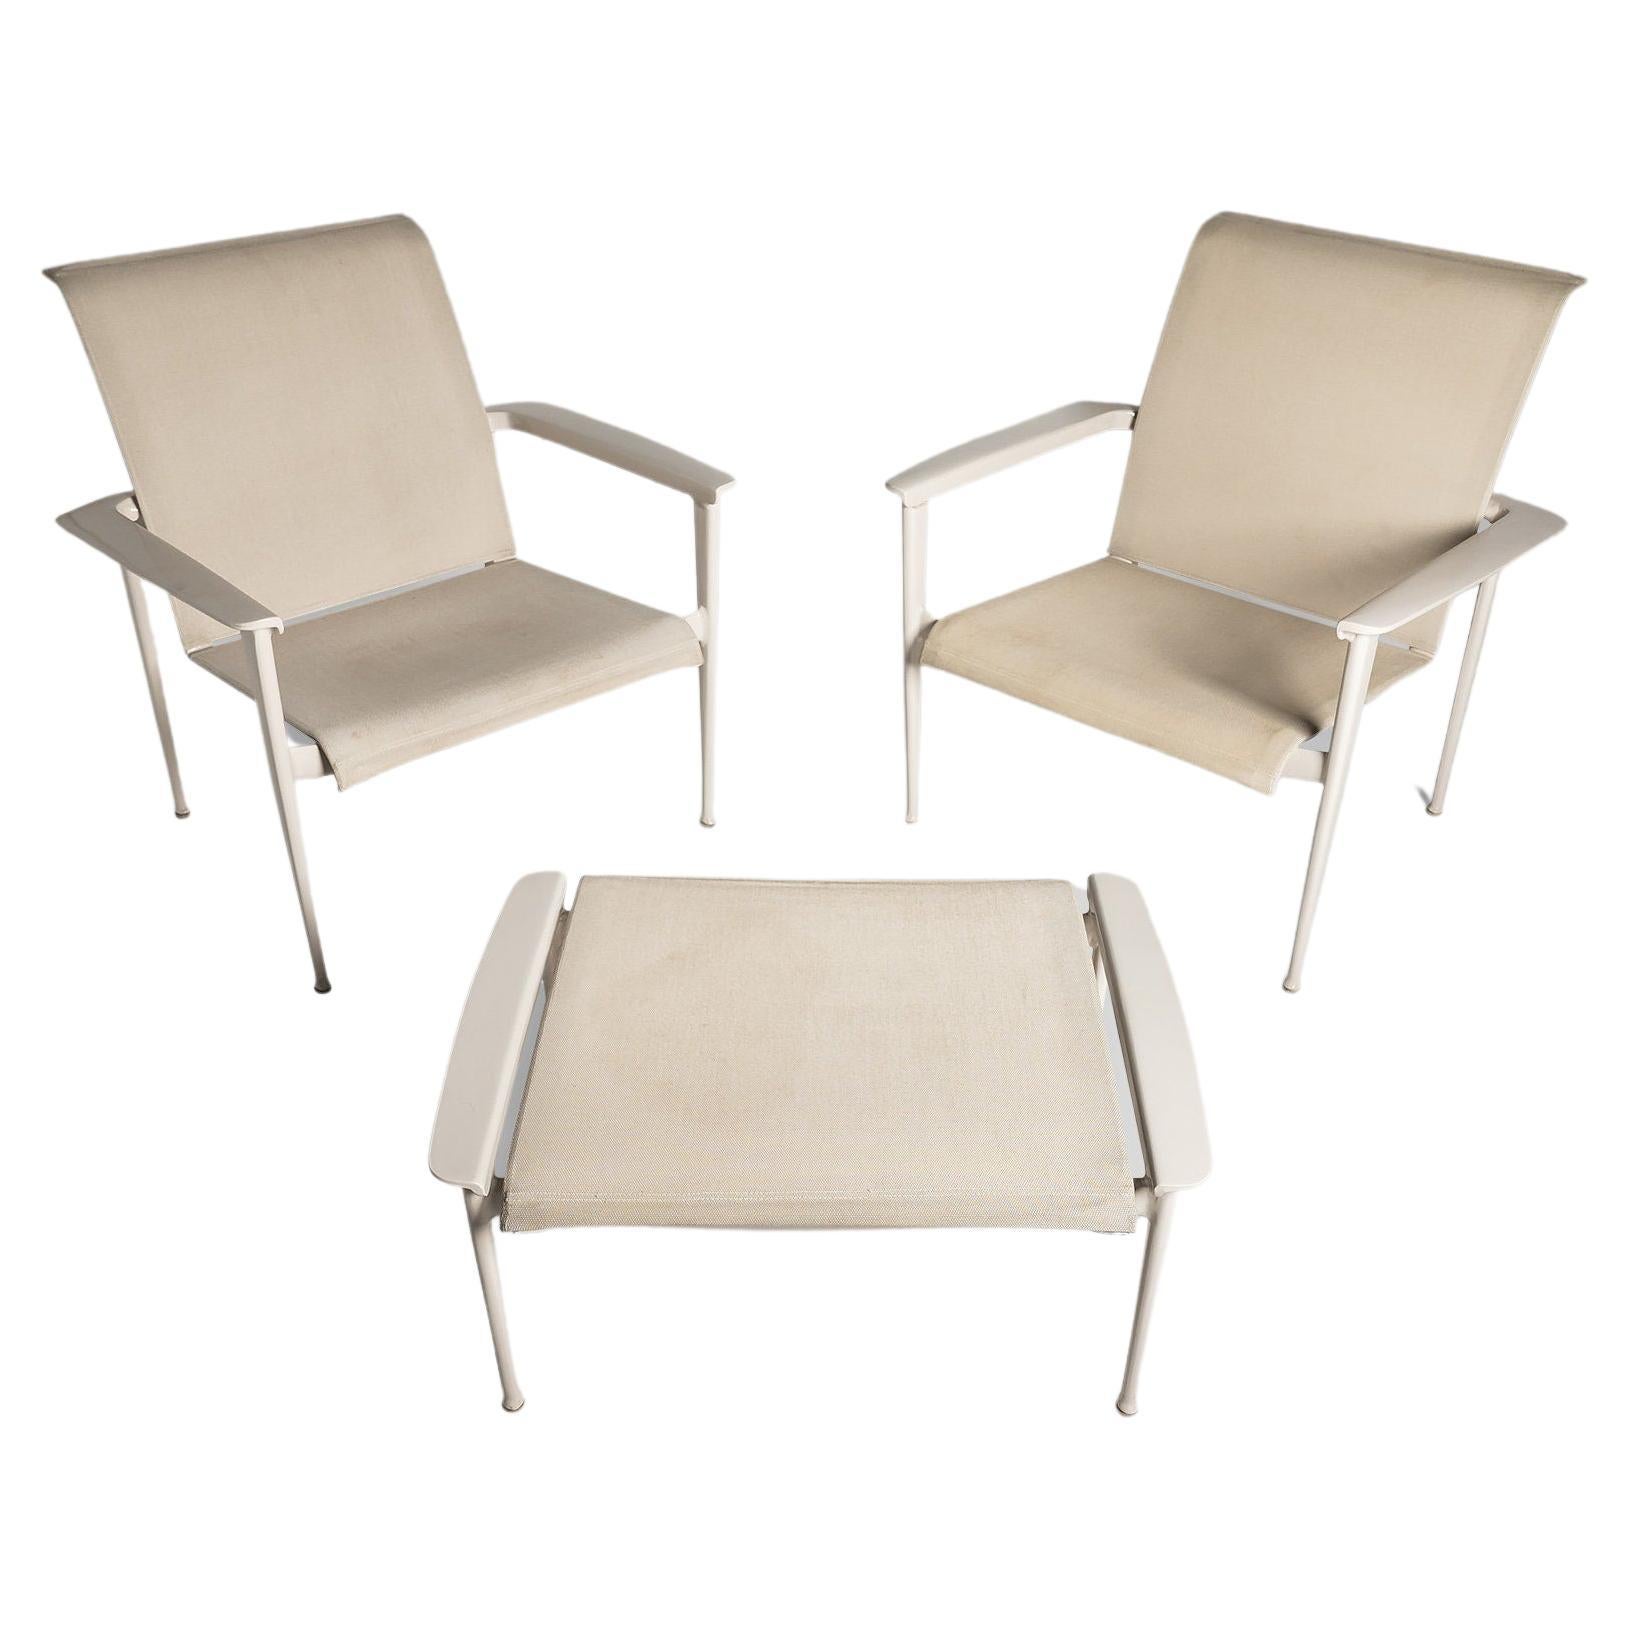 Pair of "Flight" Sling Stacking Lounge Chairs w/ Ottoman by Brown Jordan, 2011